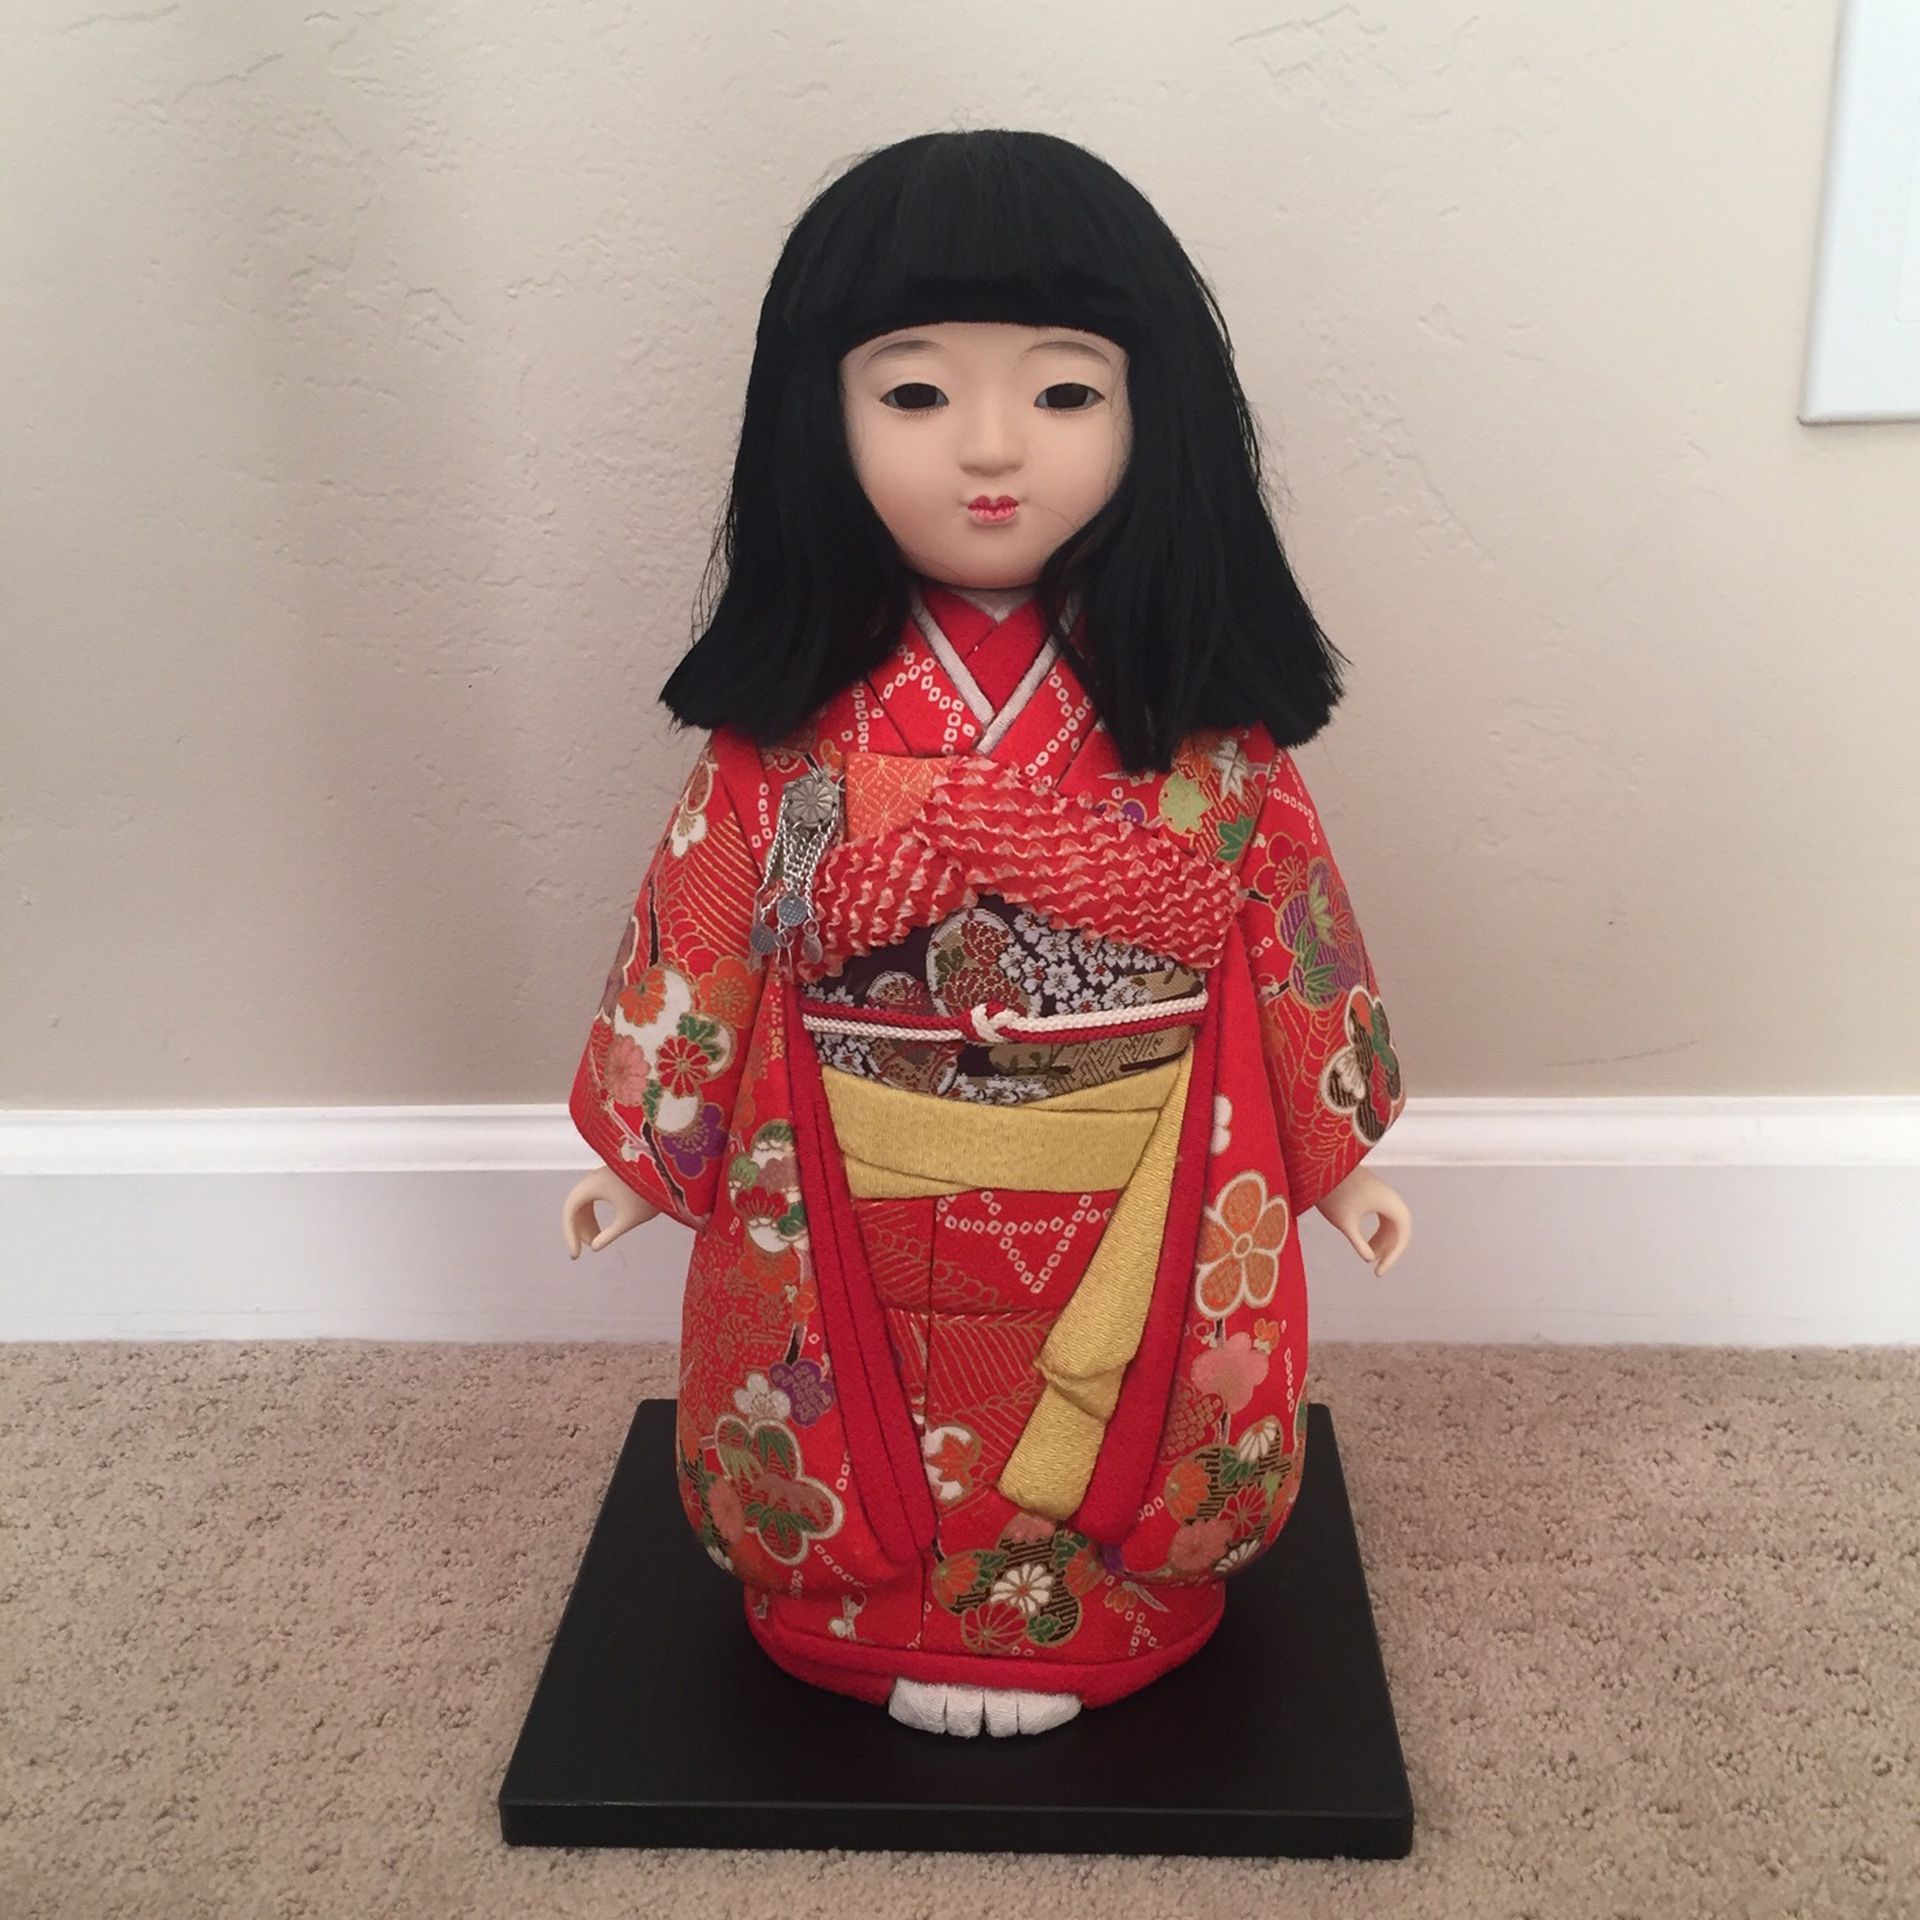 Japanese Traditional Ichimatsu Doll I Have Two Each Sold Separately